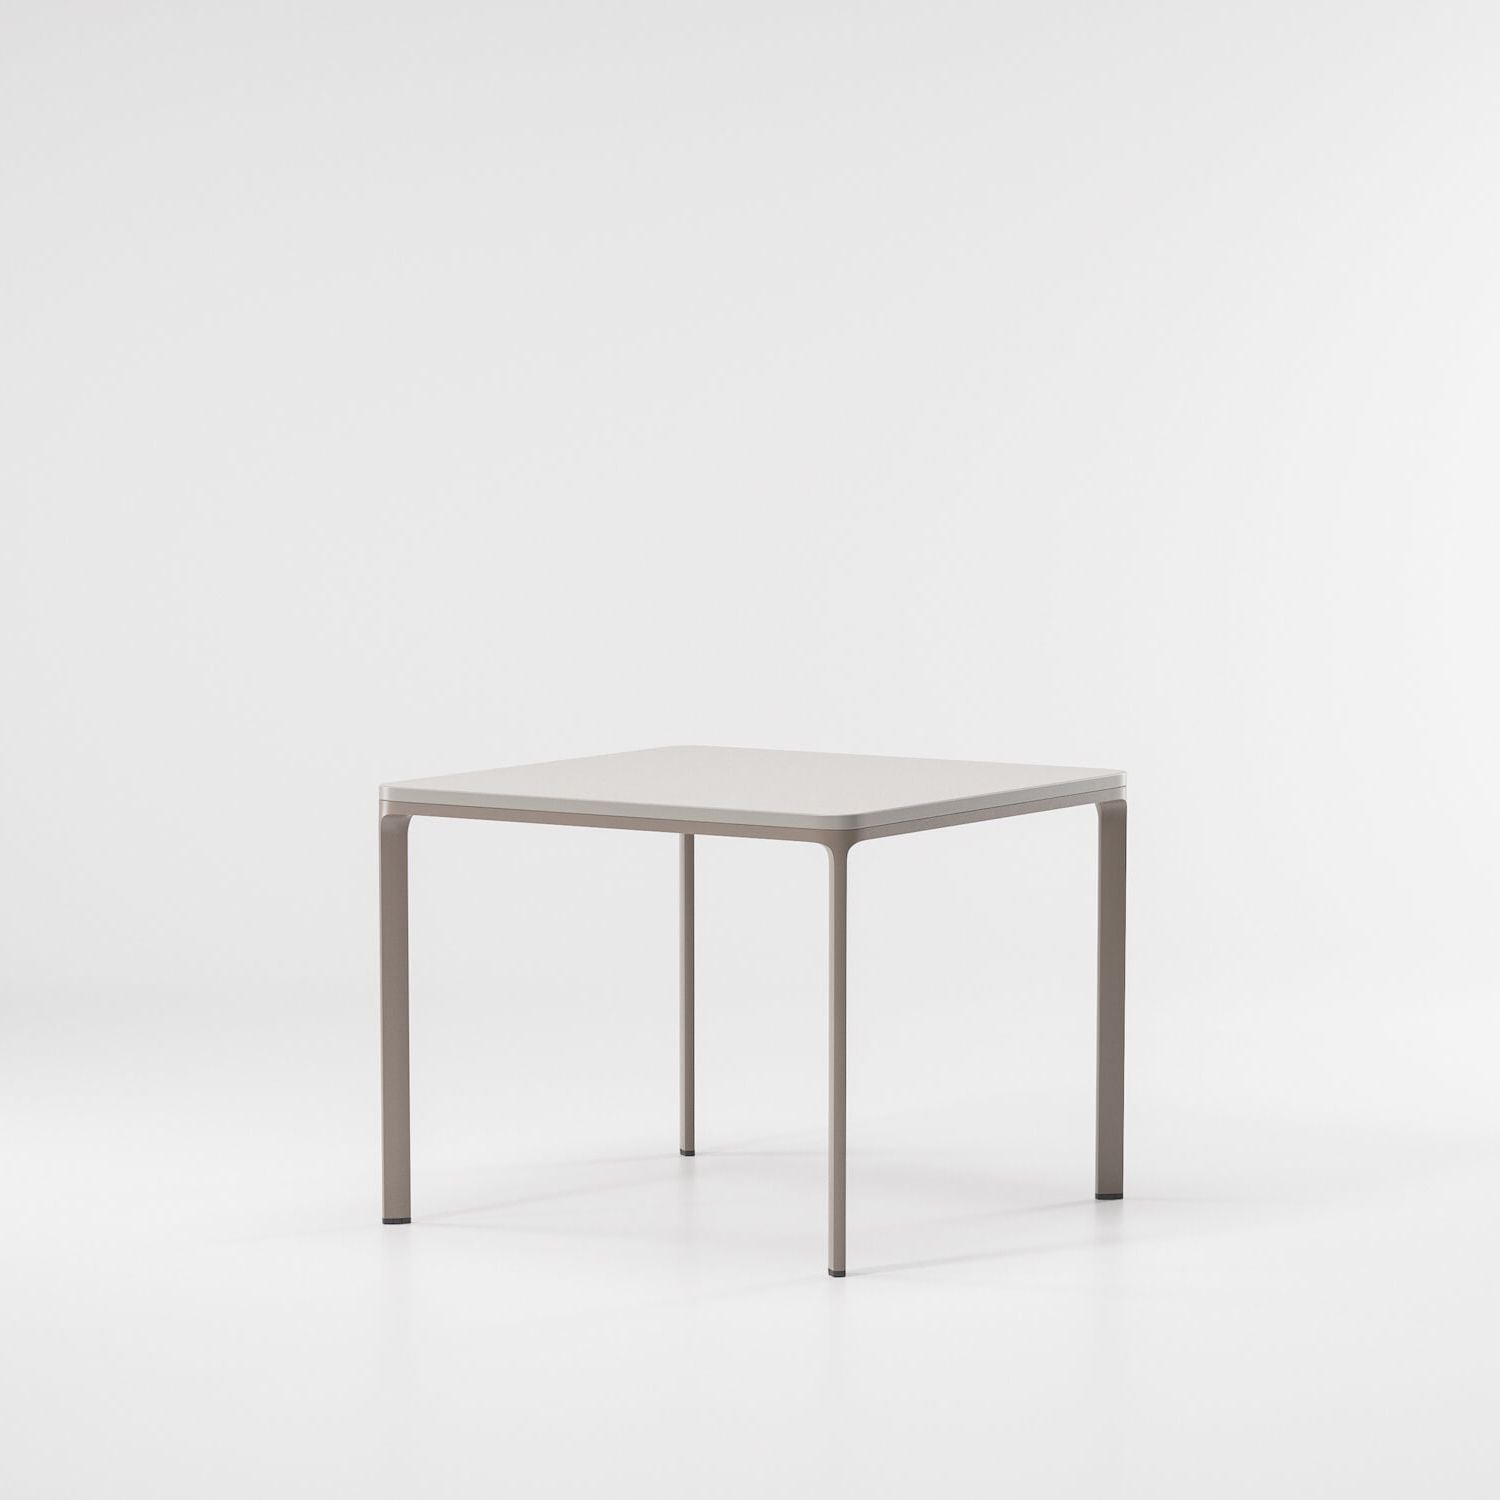 Kettal Park Life Low Dining Table 94x94